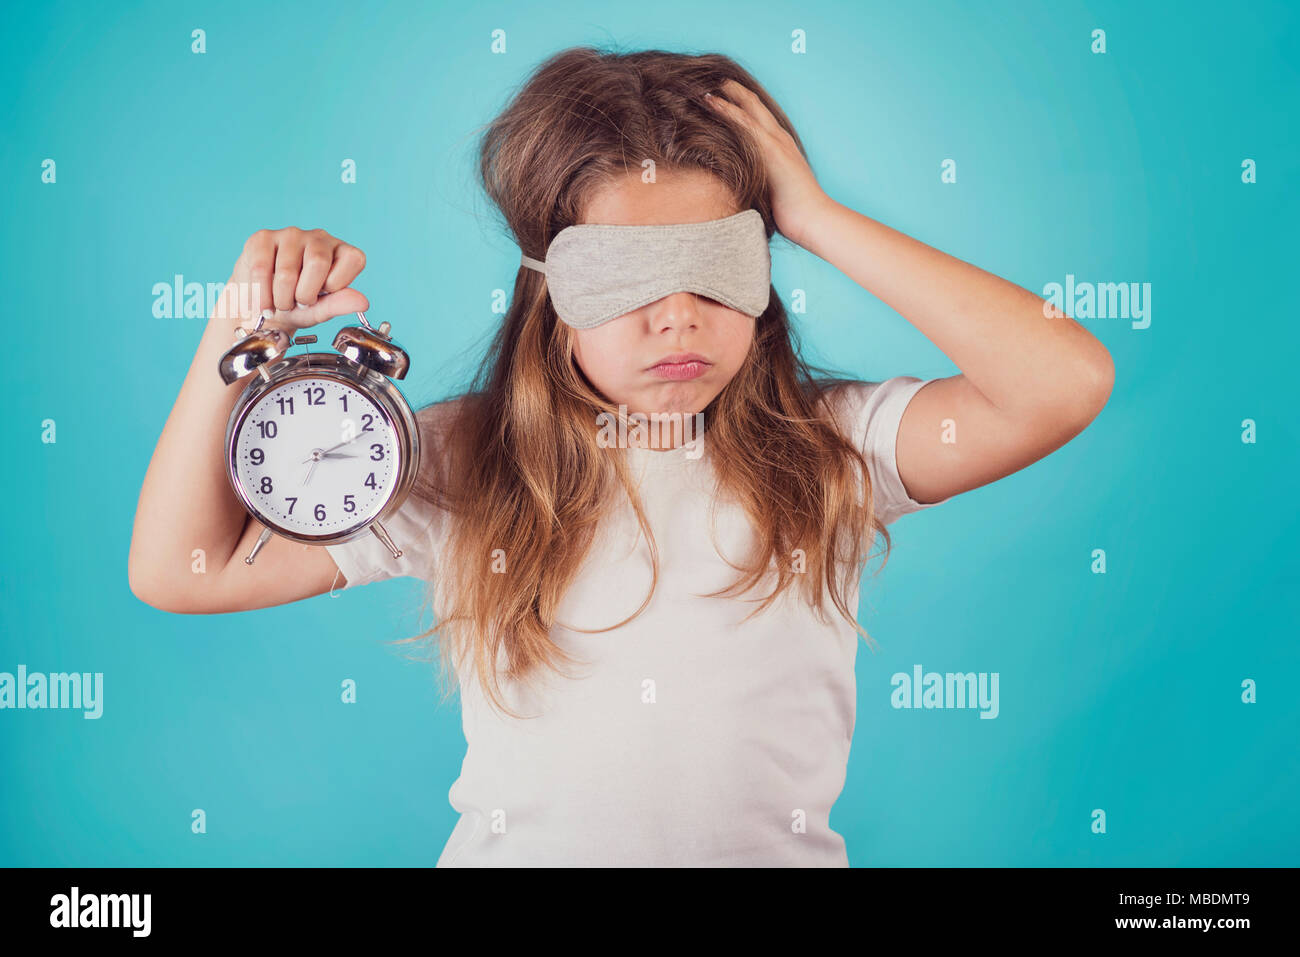 little girl with an alarm clock on blue background Stock Photo